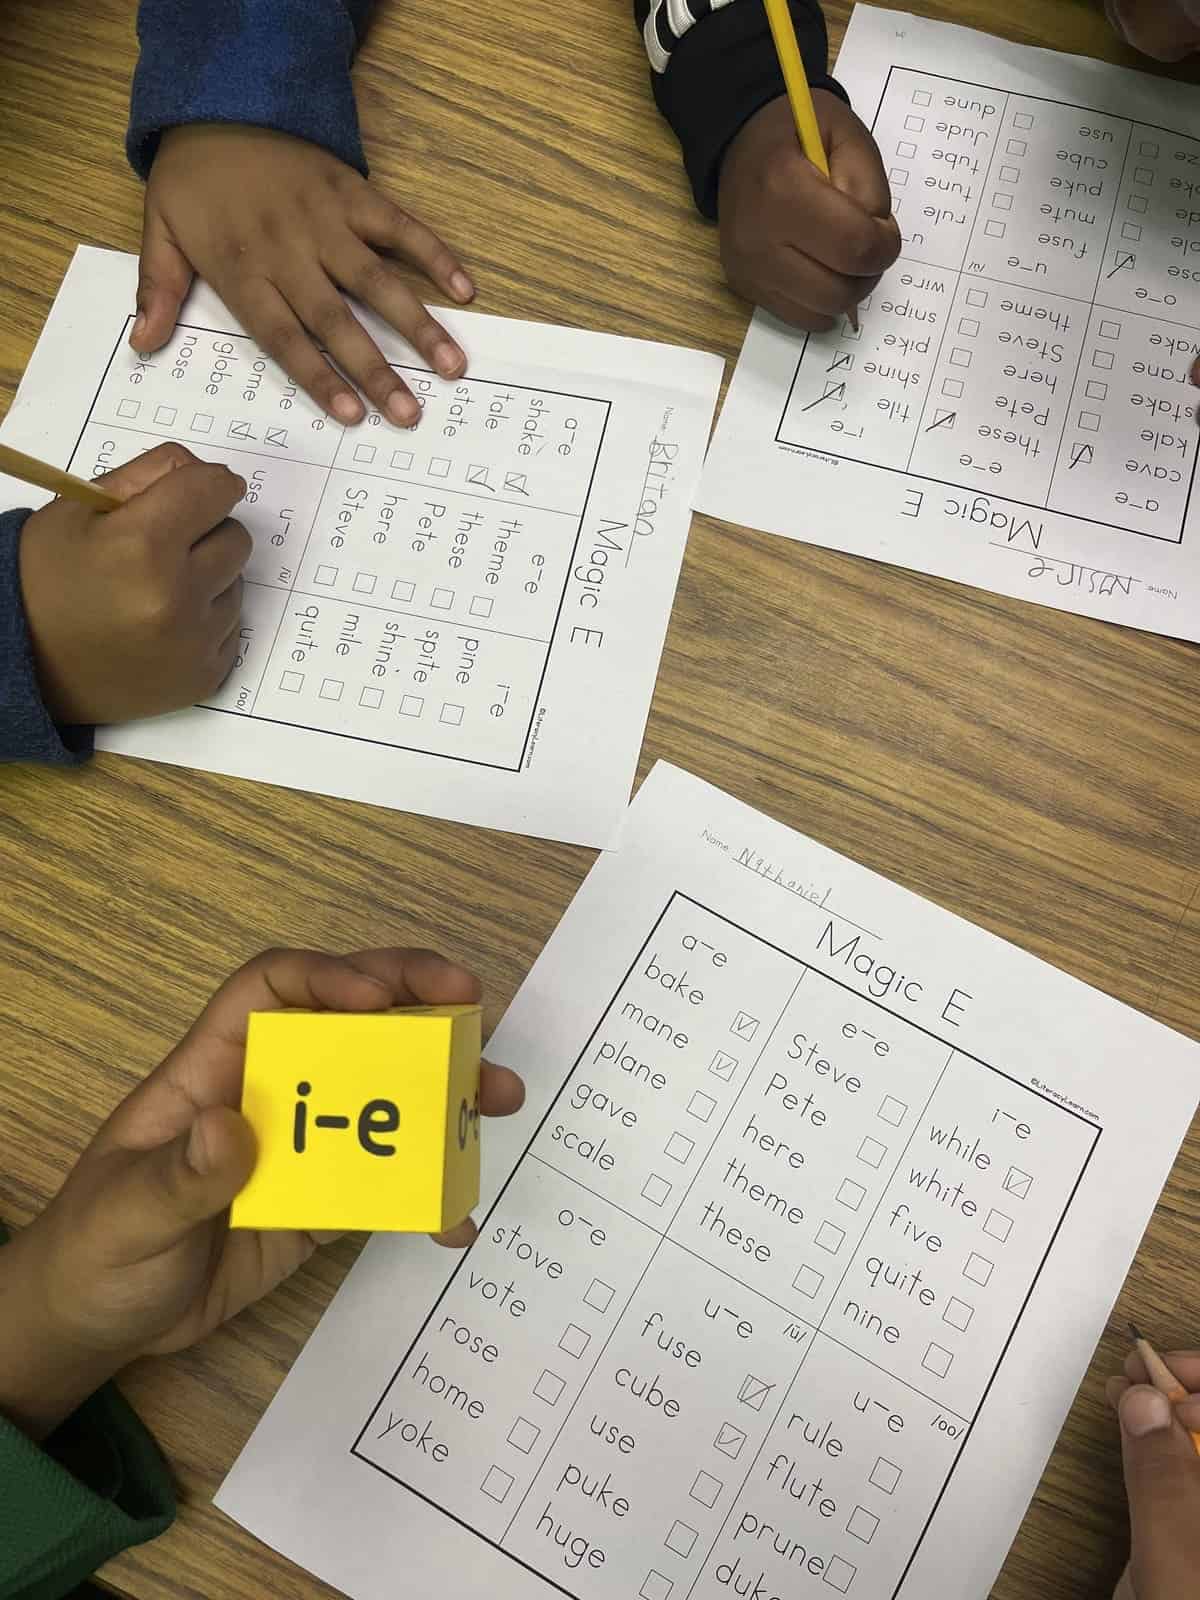 Students rolling the dice and marking the silent E words on the 3 worksheets.